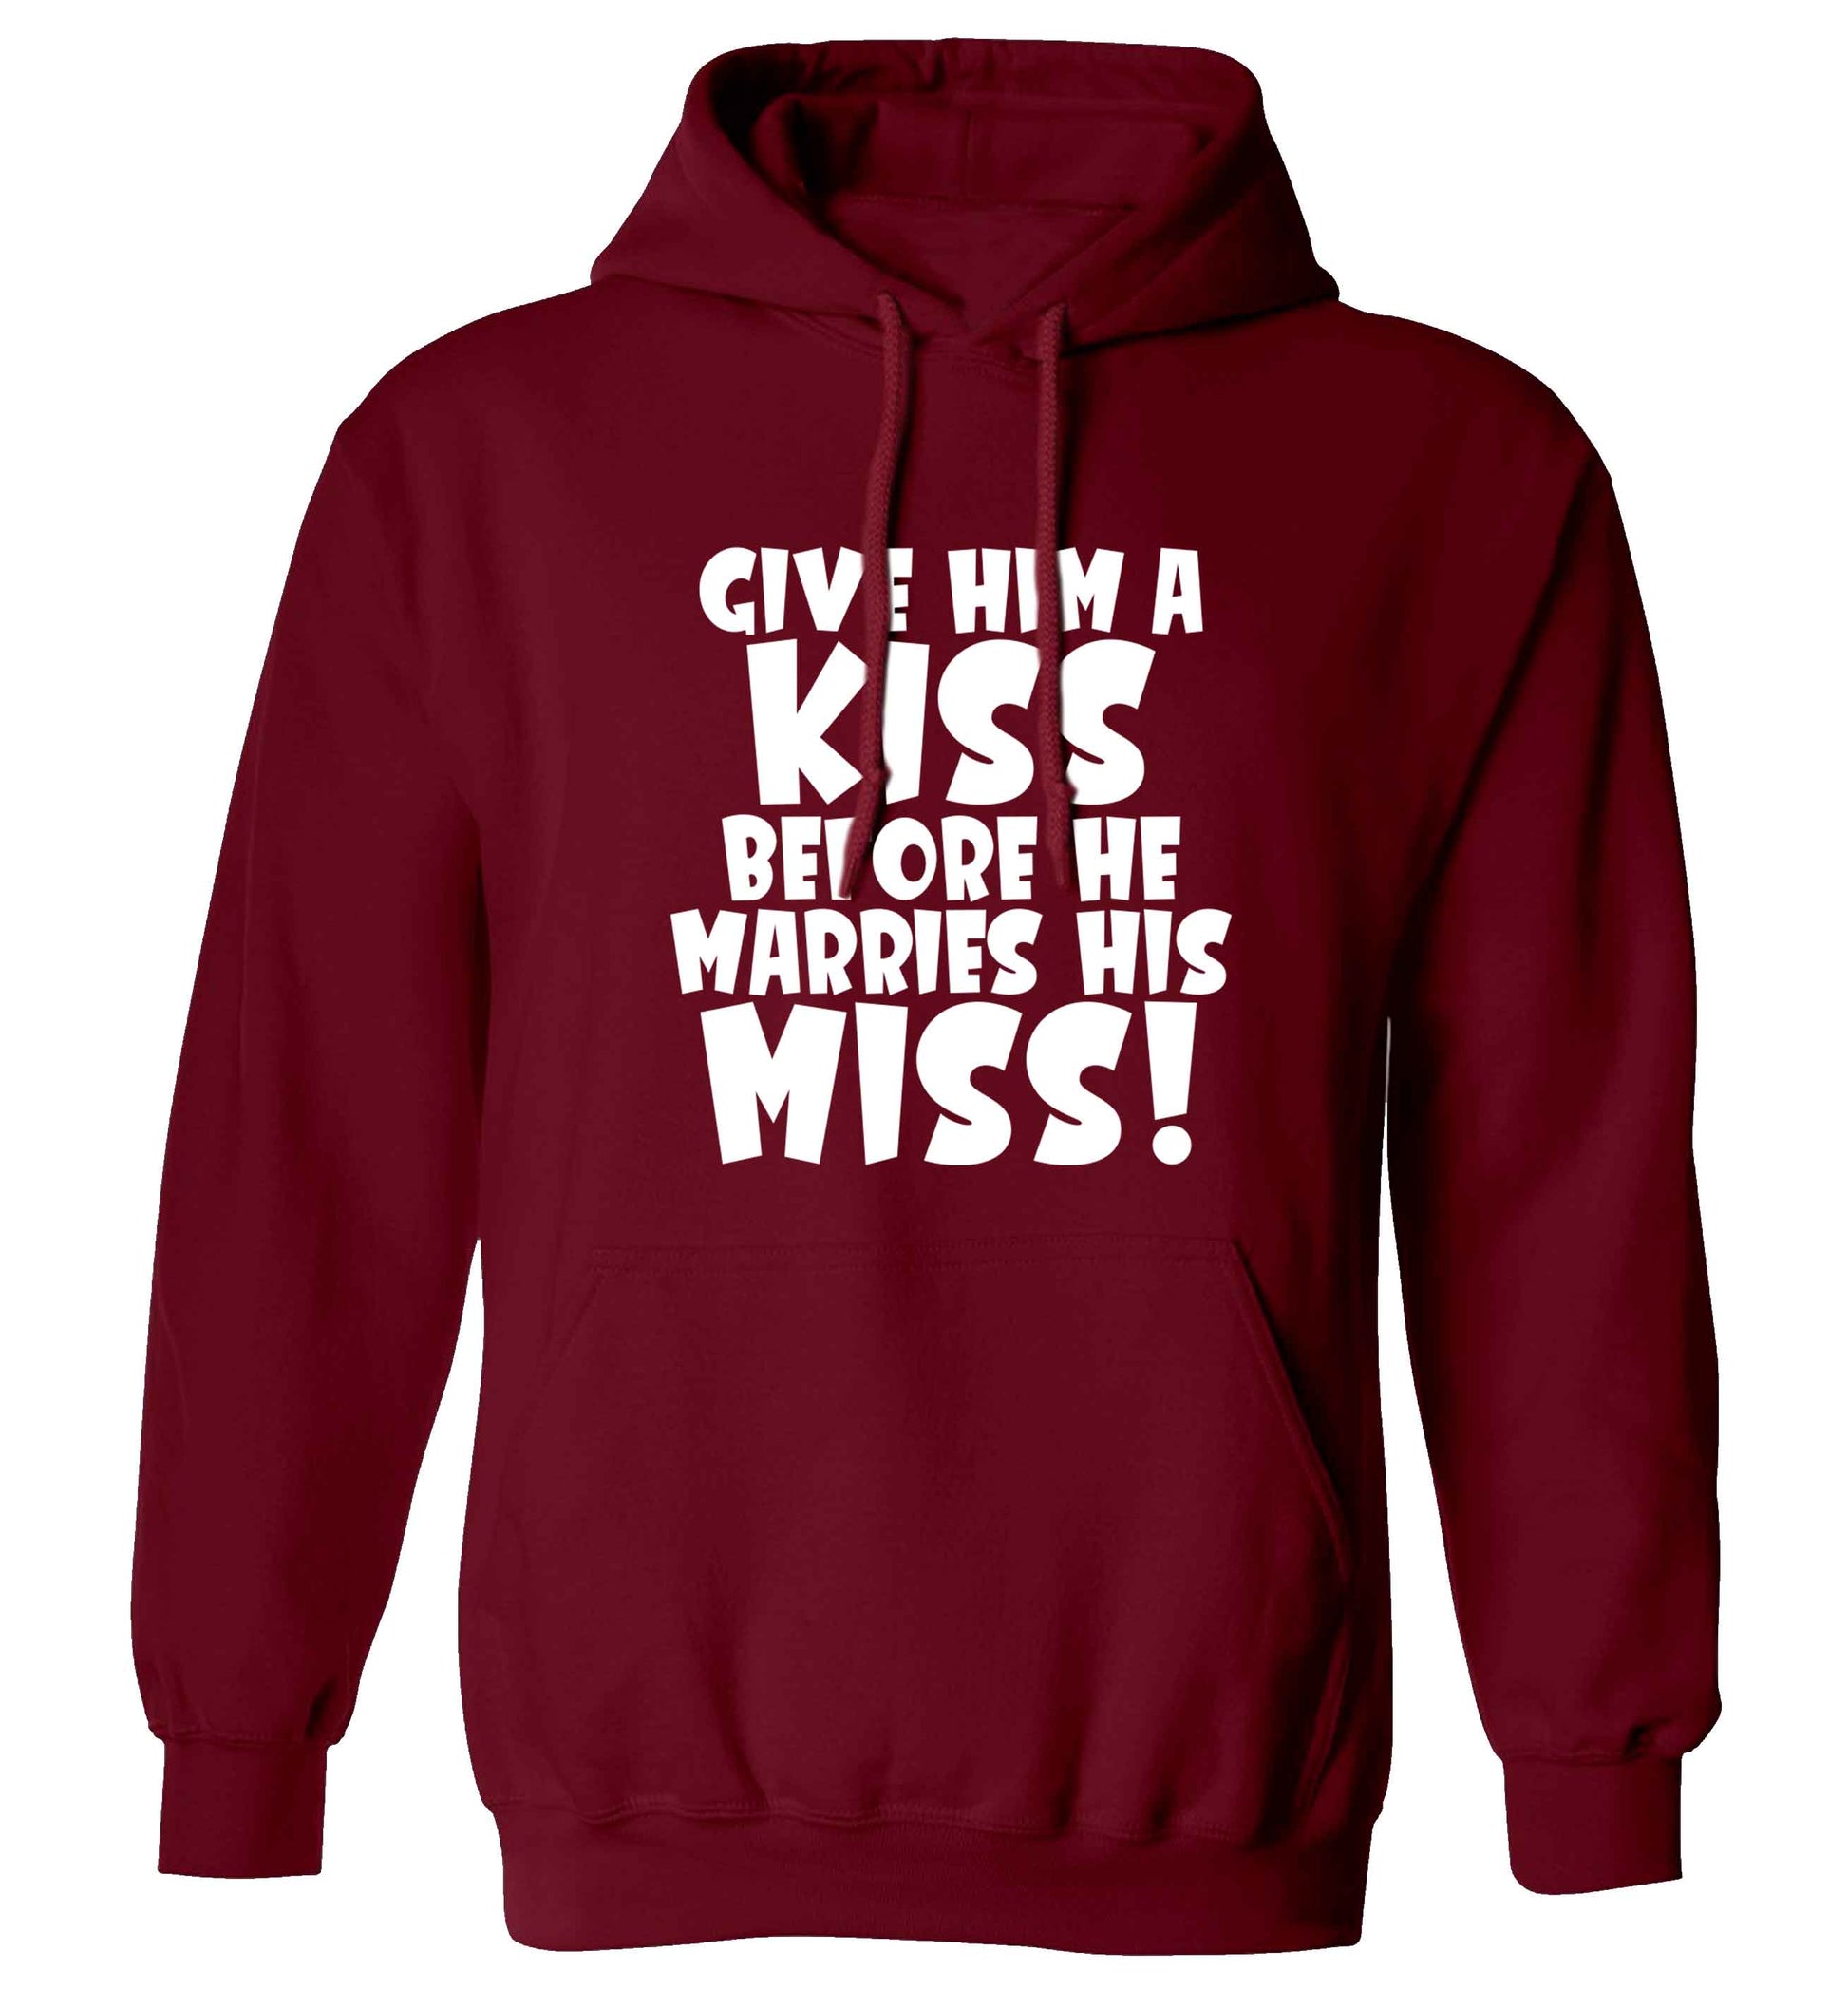 Give him a kiss before he marries his miss adults unisex maroon hoodie 2XL